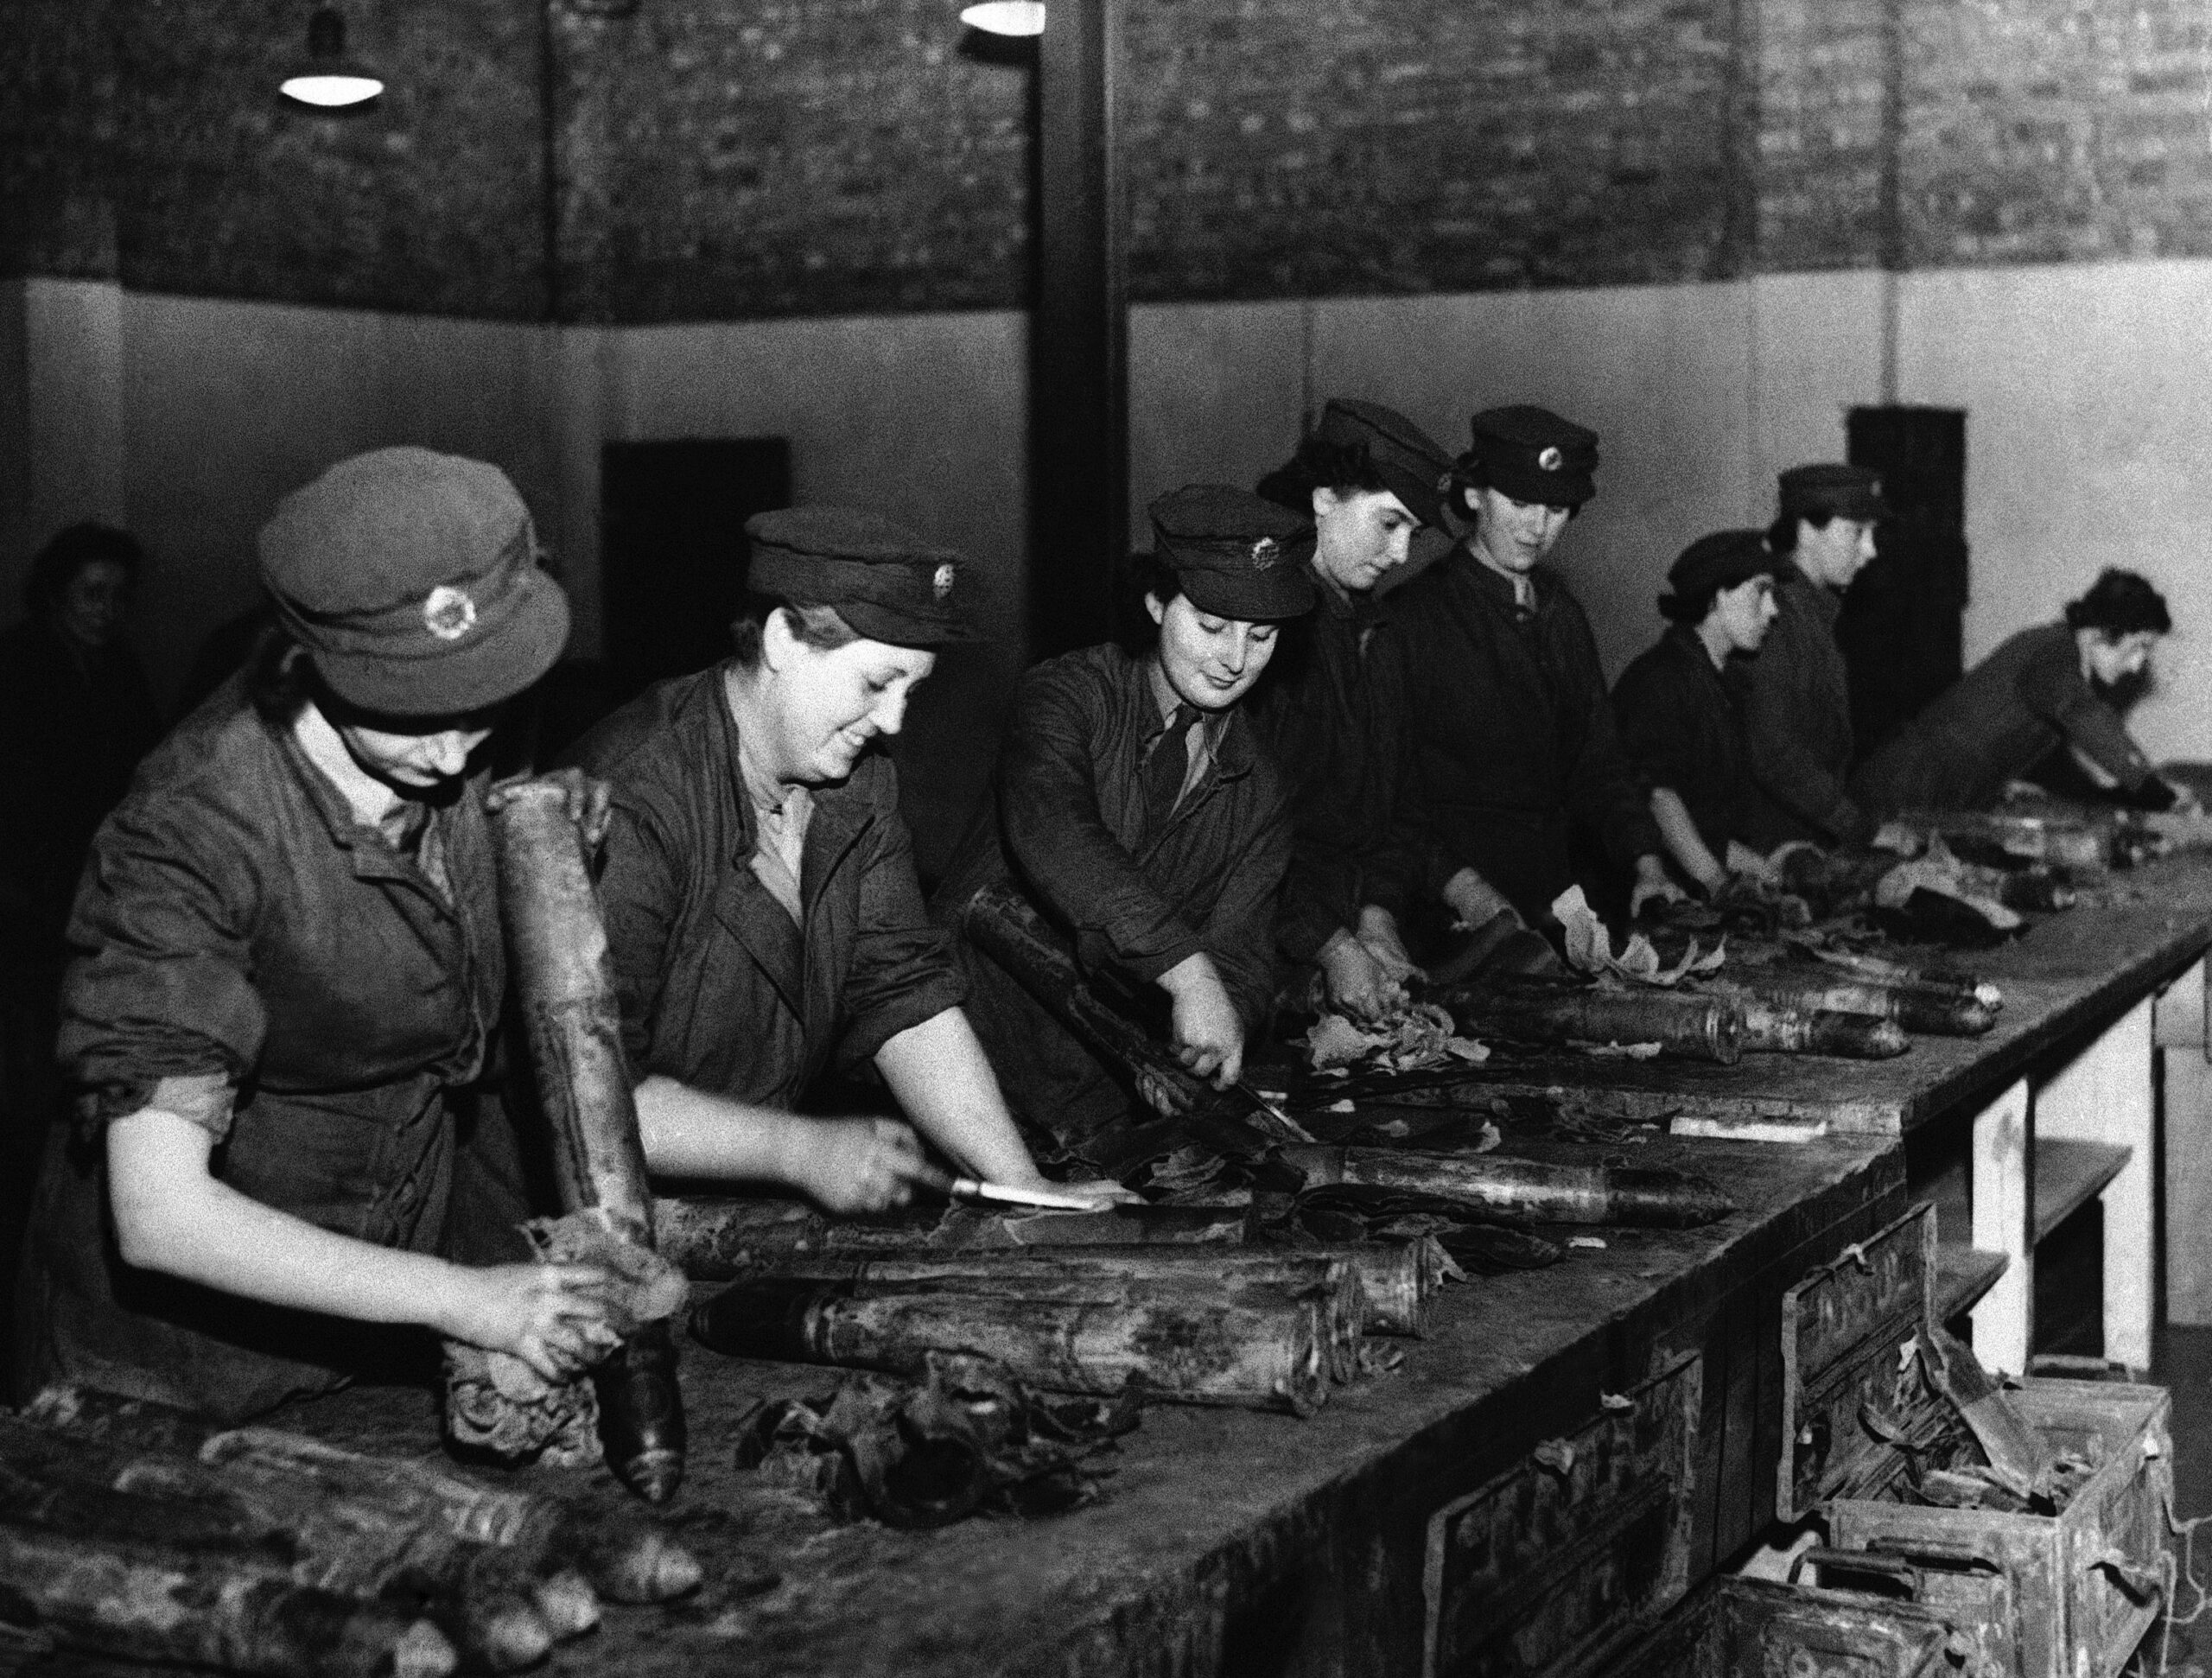 In this old photo, women in factory uniforms handle dirty bomb shells. Some of them wipe them clean with a rag.